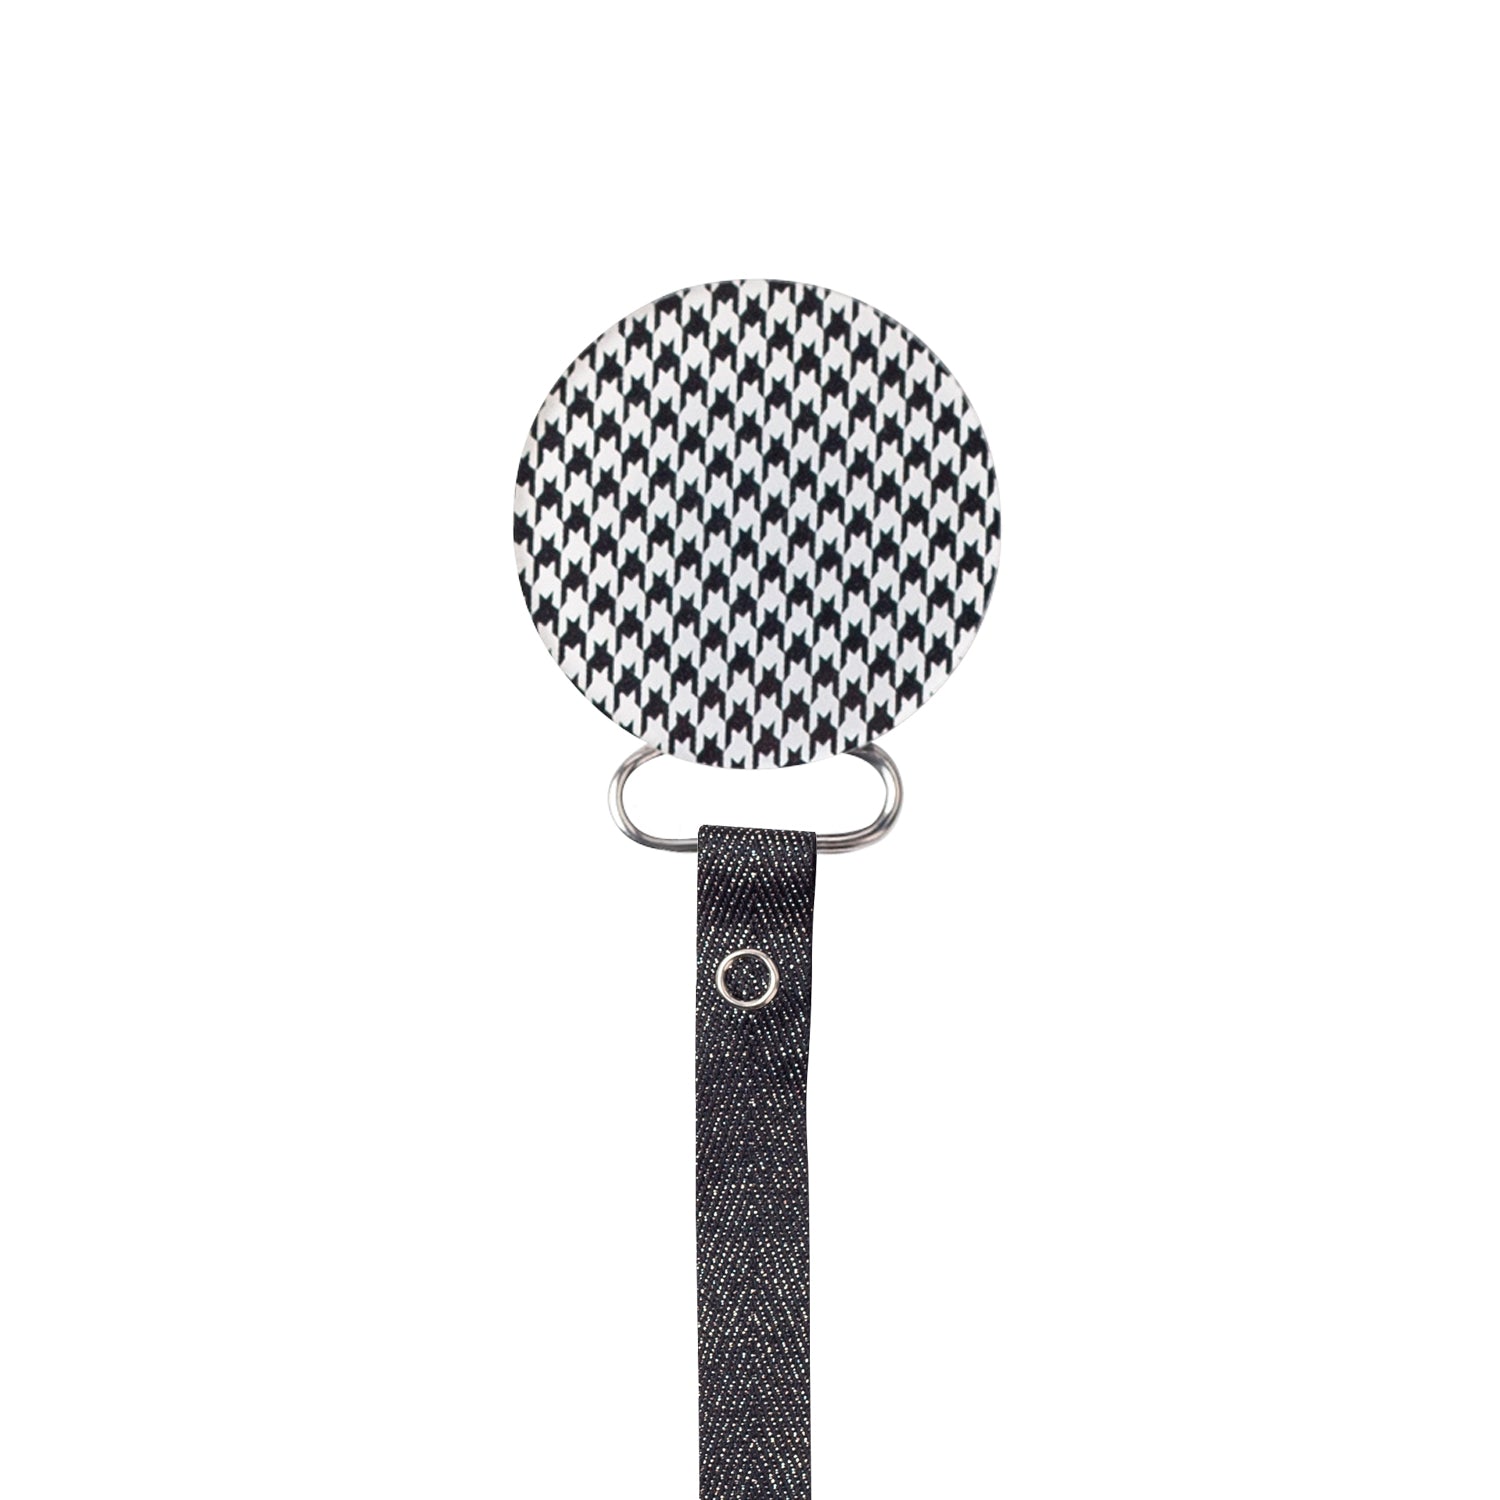 Classy Paci Houndstooth Black White Check Circle, white, grey, red, gold, baby boy girl pacifier clip